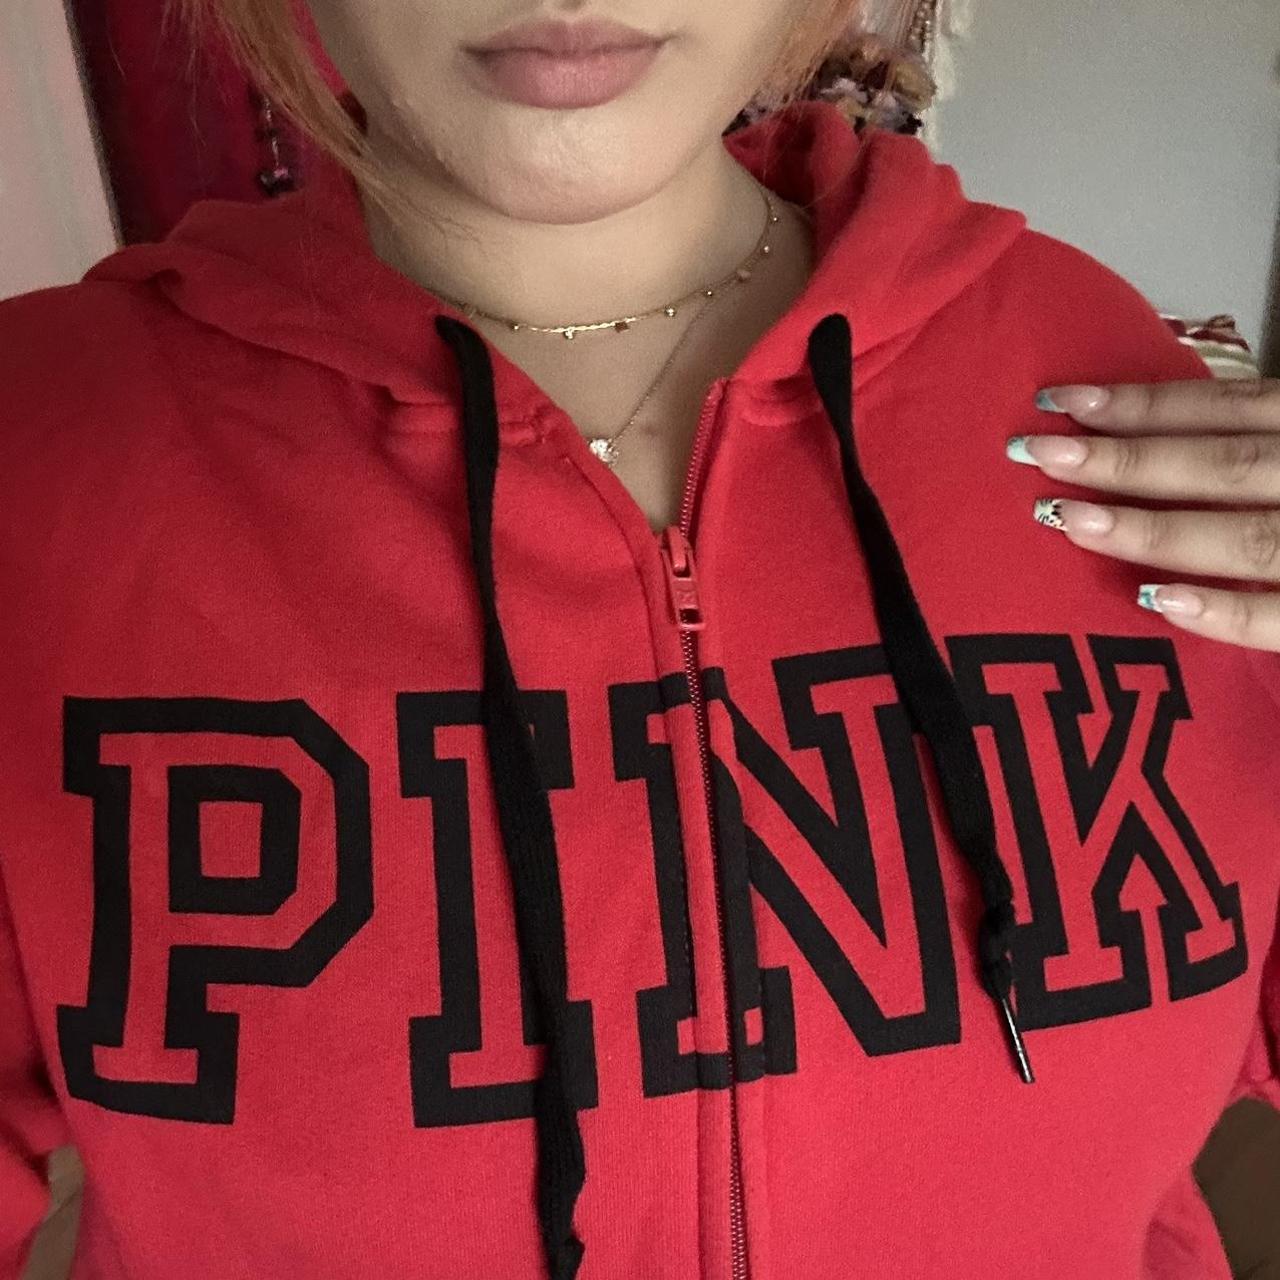 Plain pink all in motion hoodie🩷 Super soft and - Depop